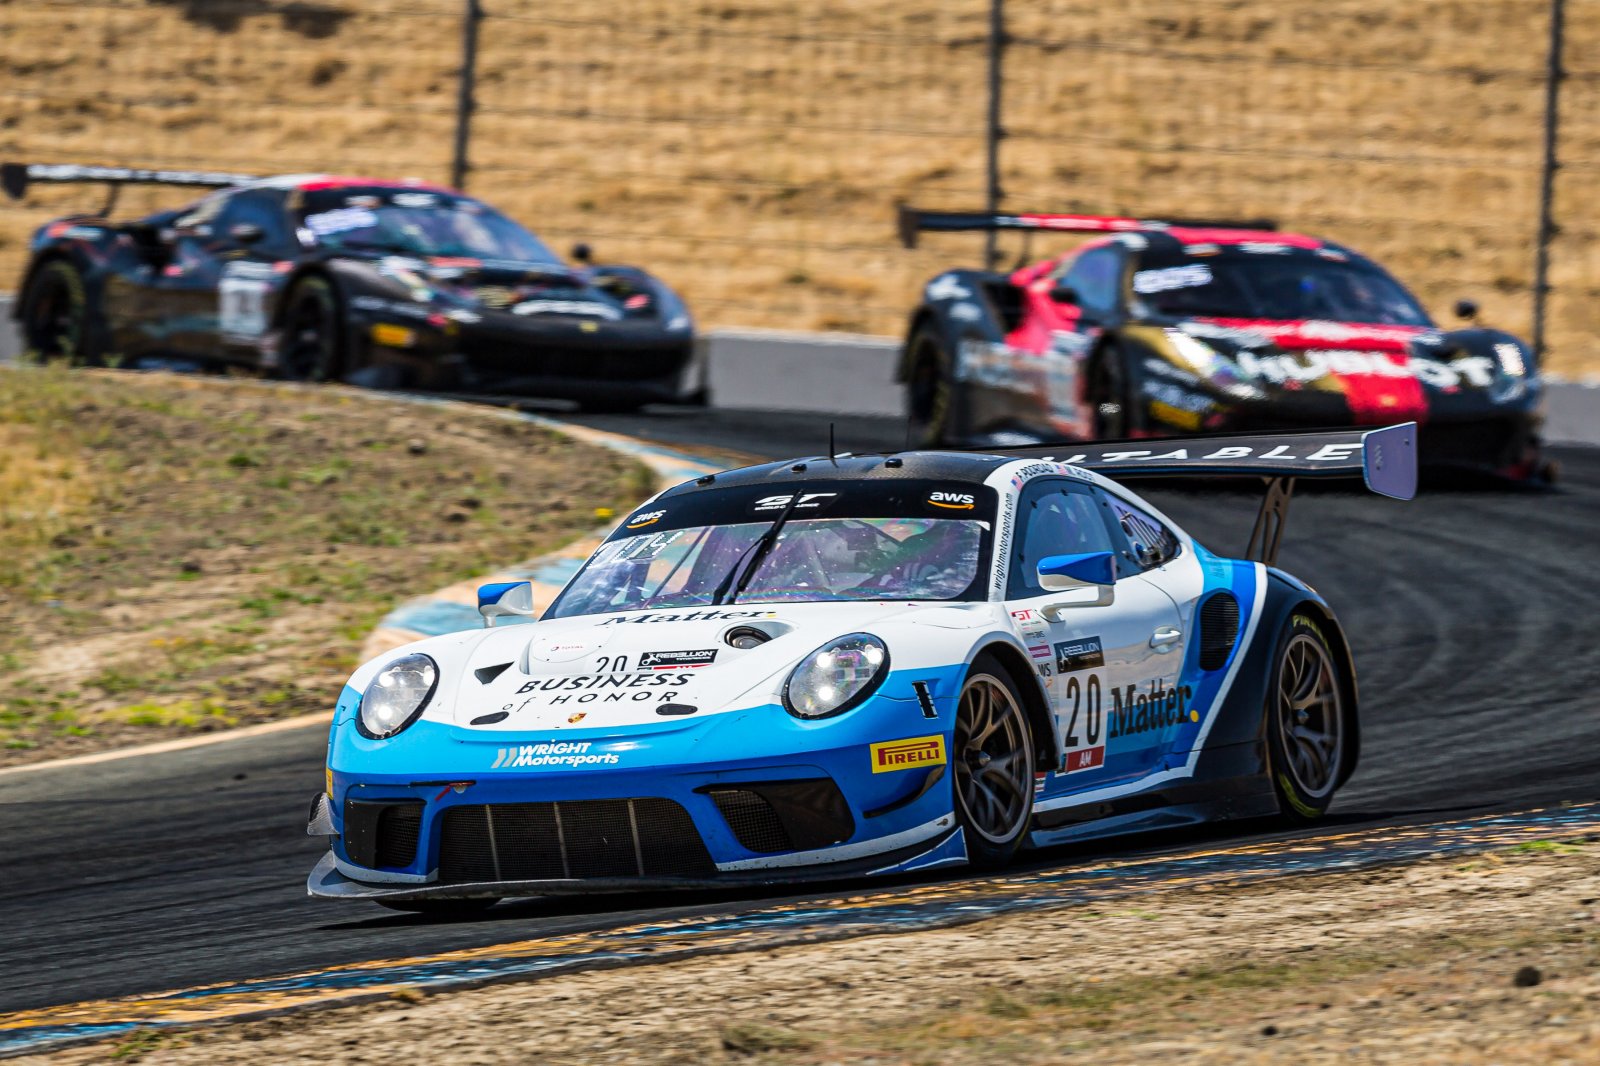 SRO America Returns to Racing in 2021 at Sonoma Raceway